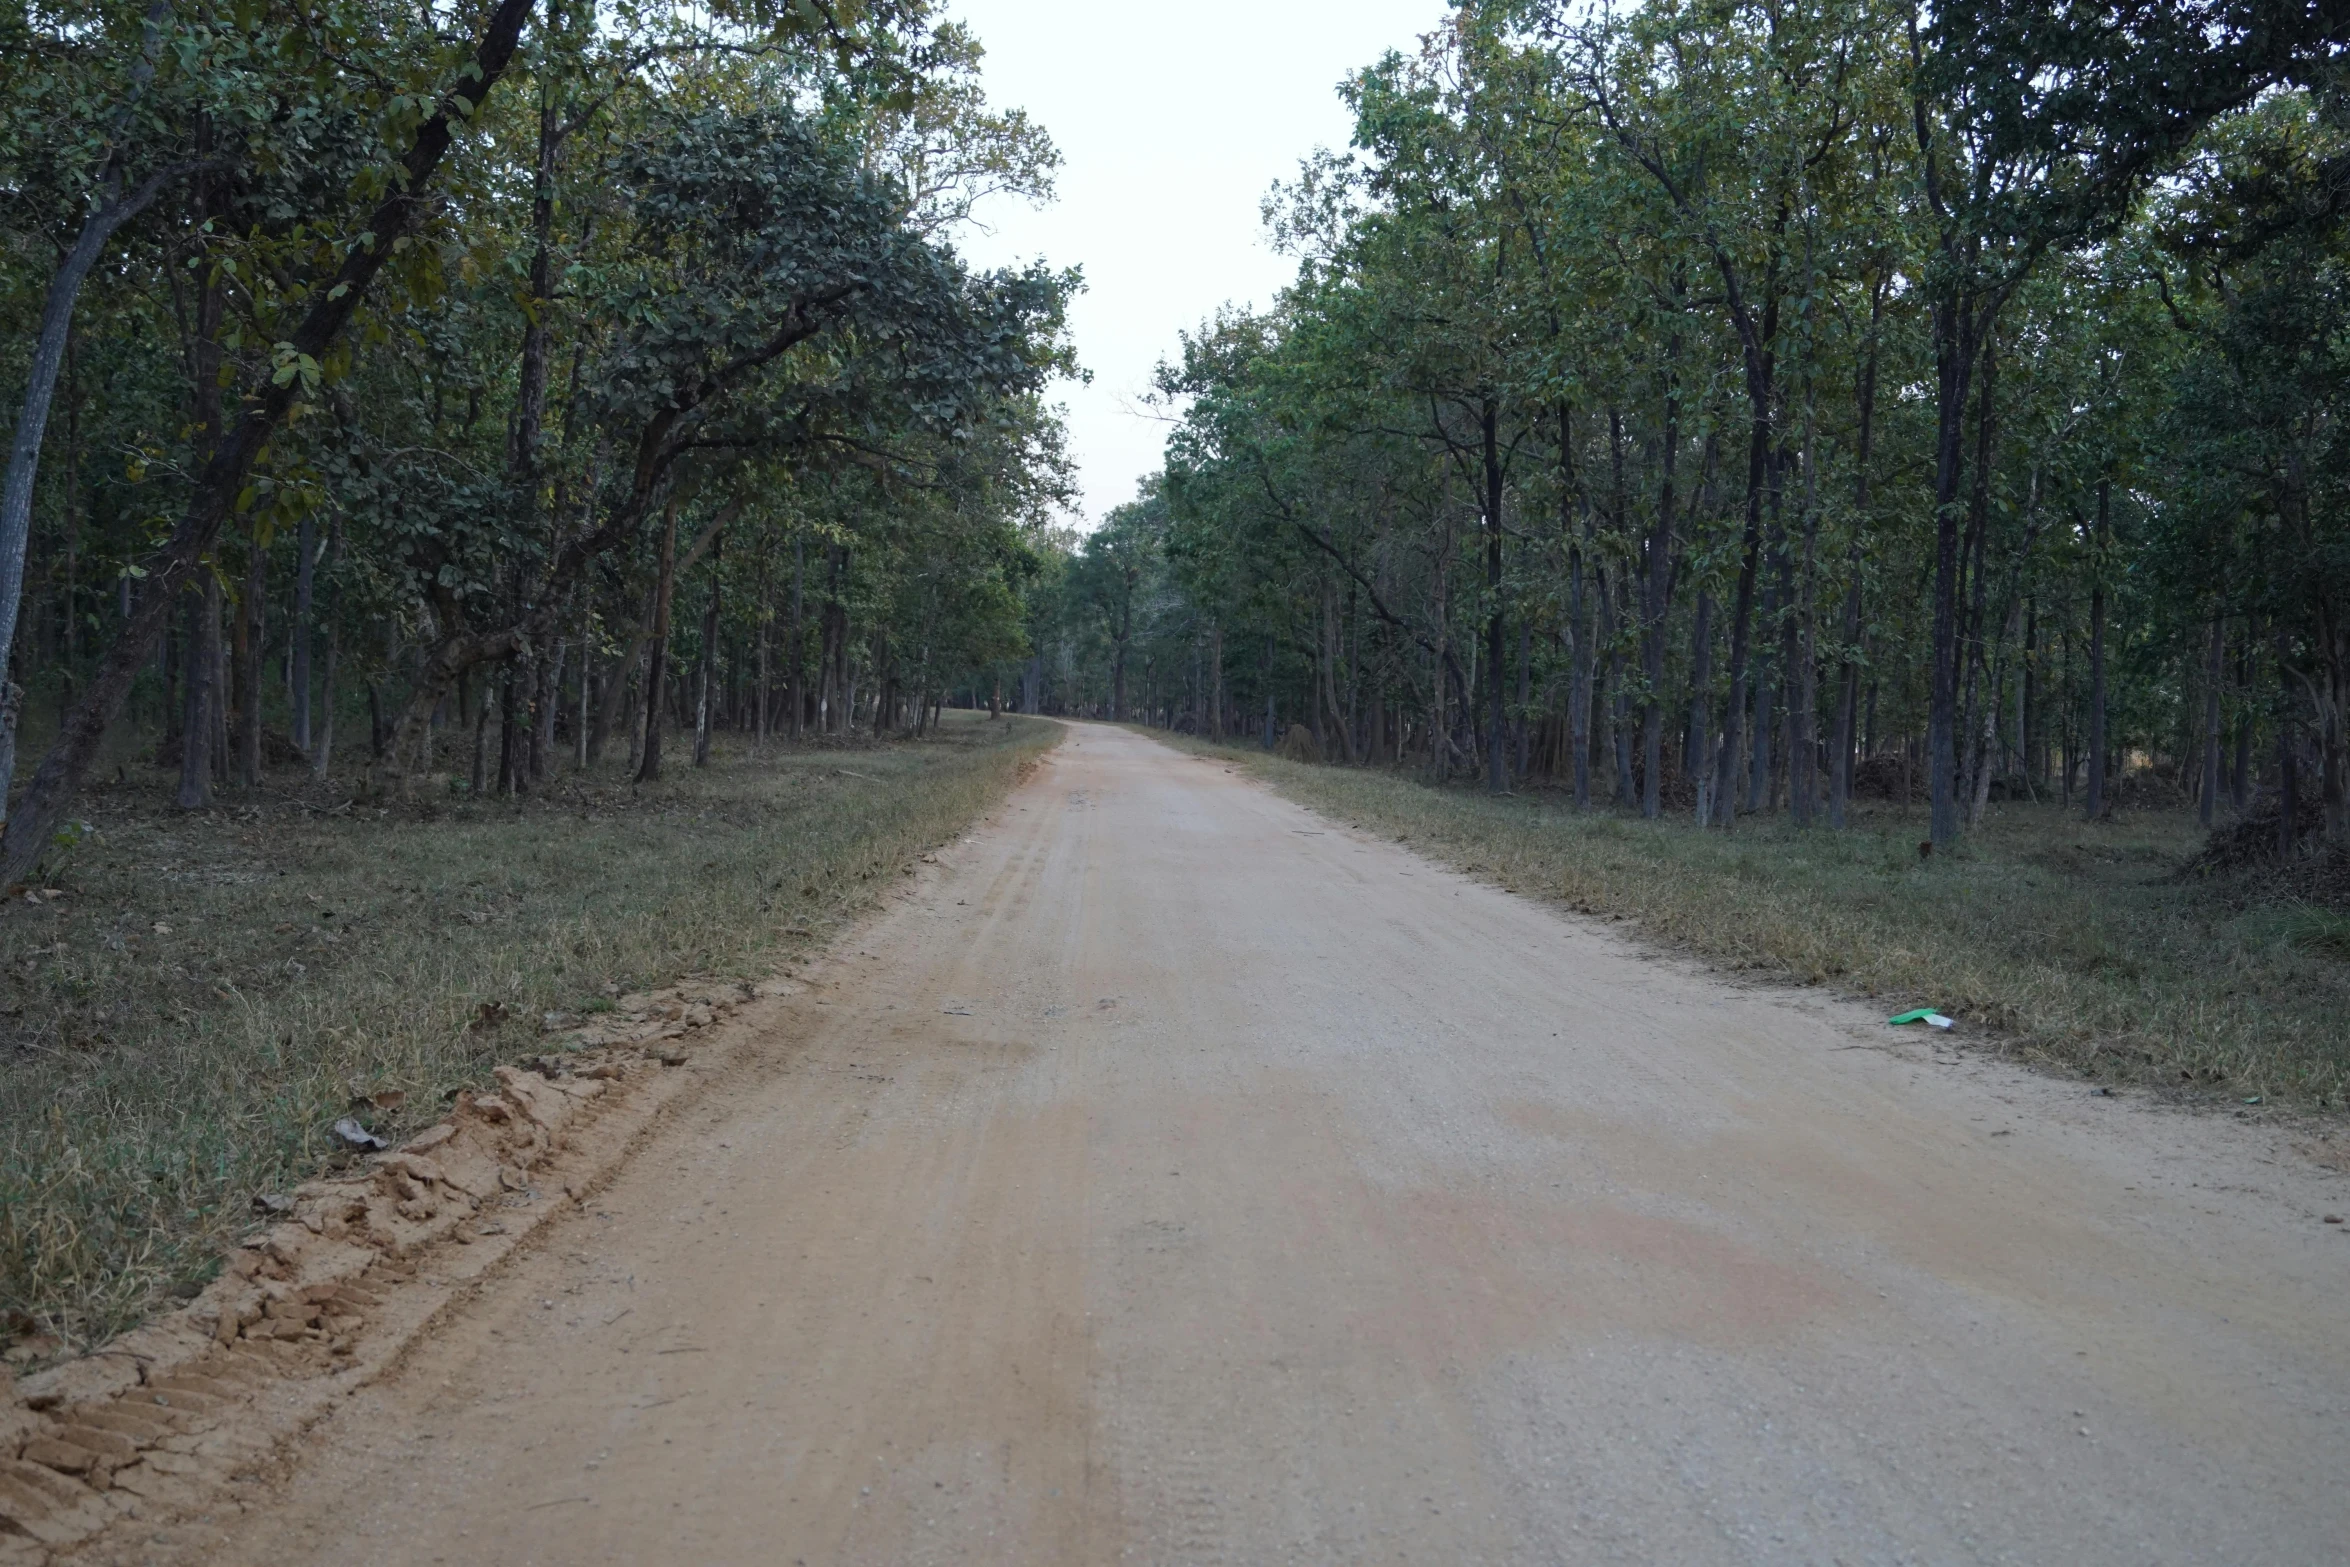 the gravel road is next to the wooded area